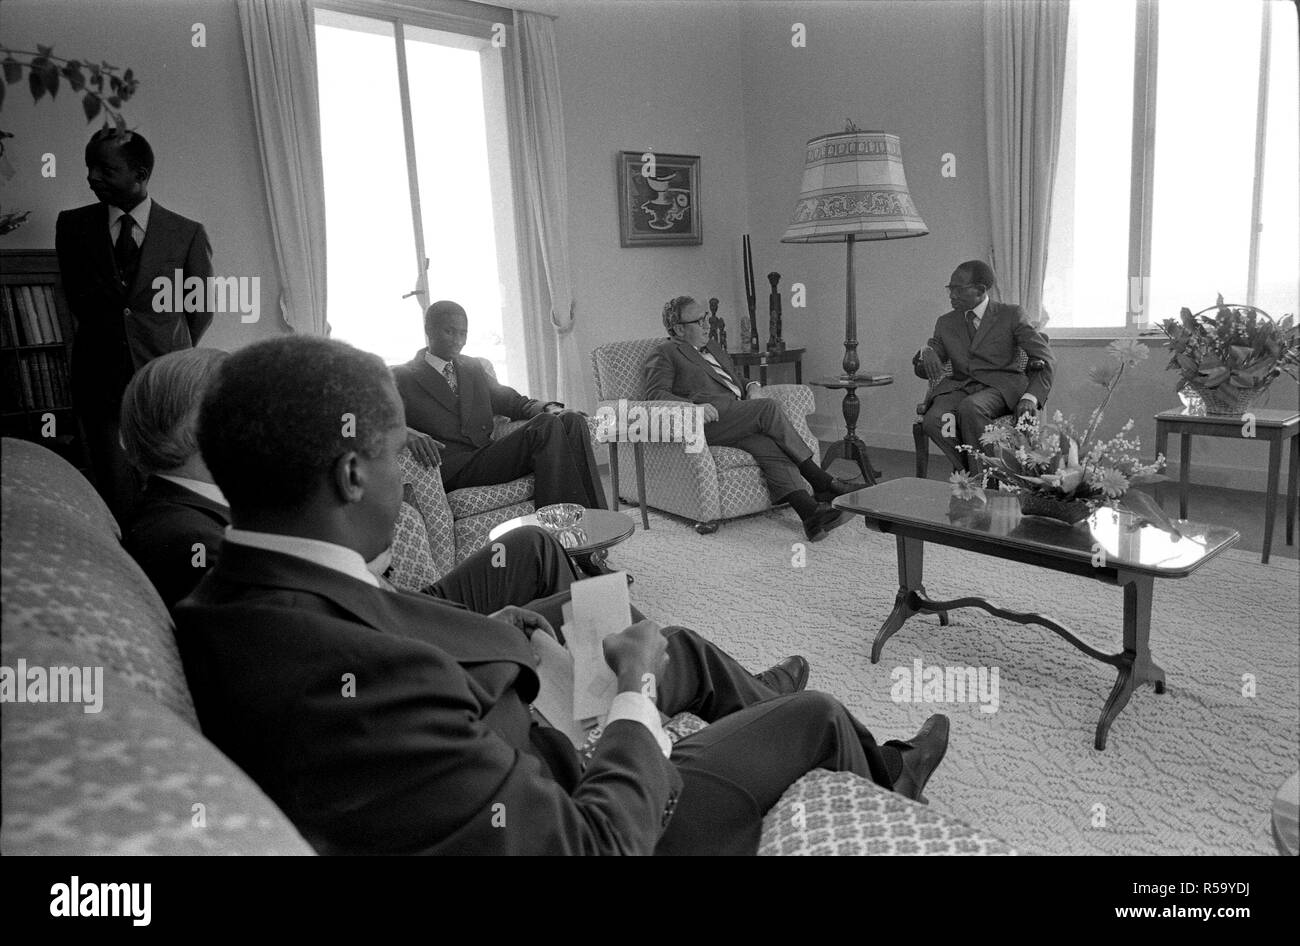 1976, May 1 – President's Palace – Dakar, Senegal (Africa) – Henry Kissinger, Leopold Senghor, Others – seated in chairs and sofas, talking – Secretary of State Trip to Africa; Meeting with Senegalese President Leopold Senghor Stock Photo